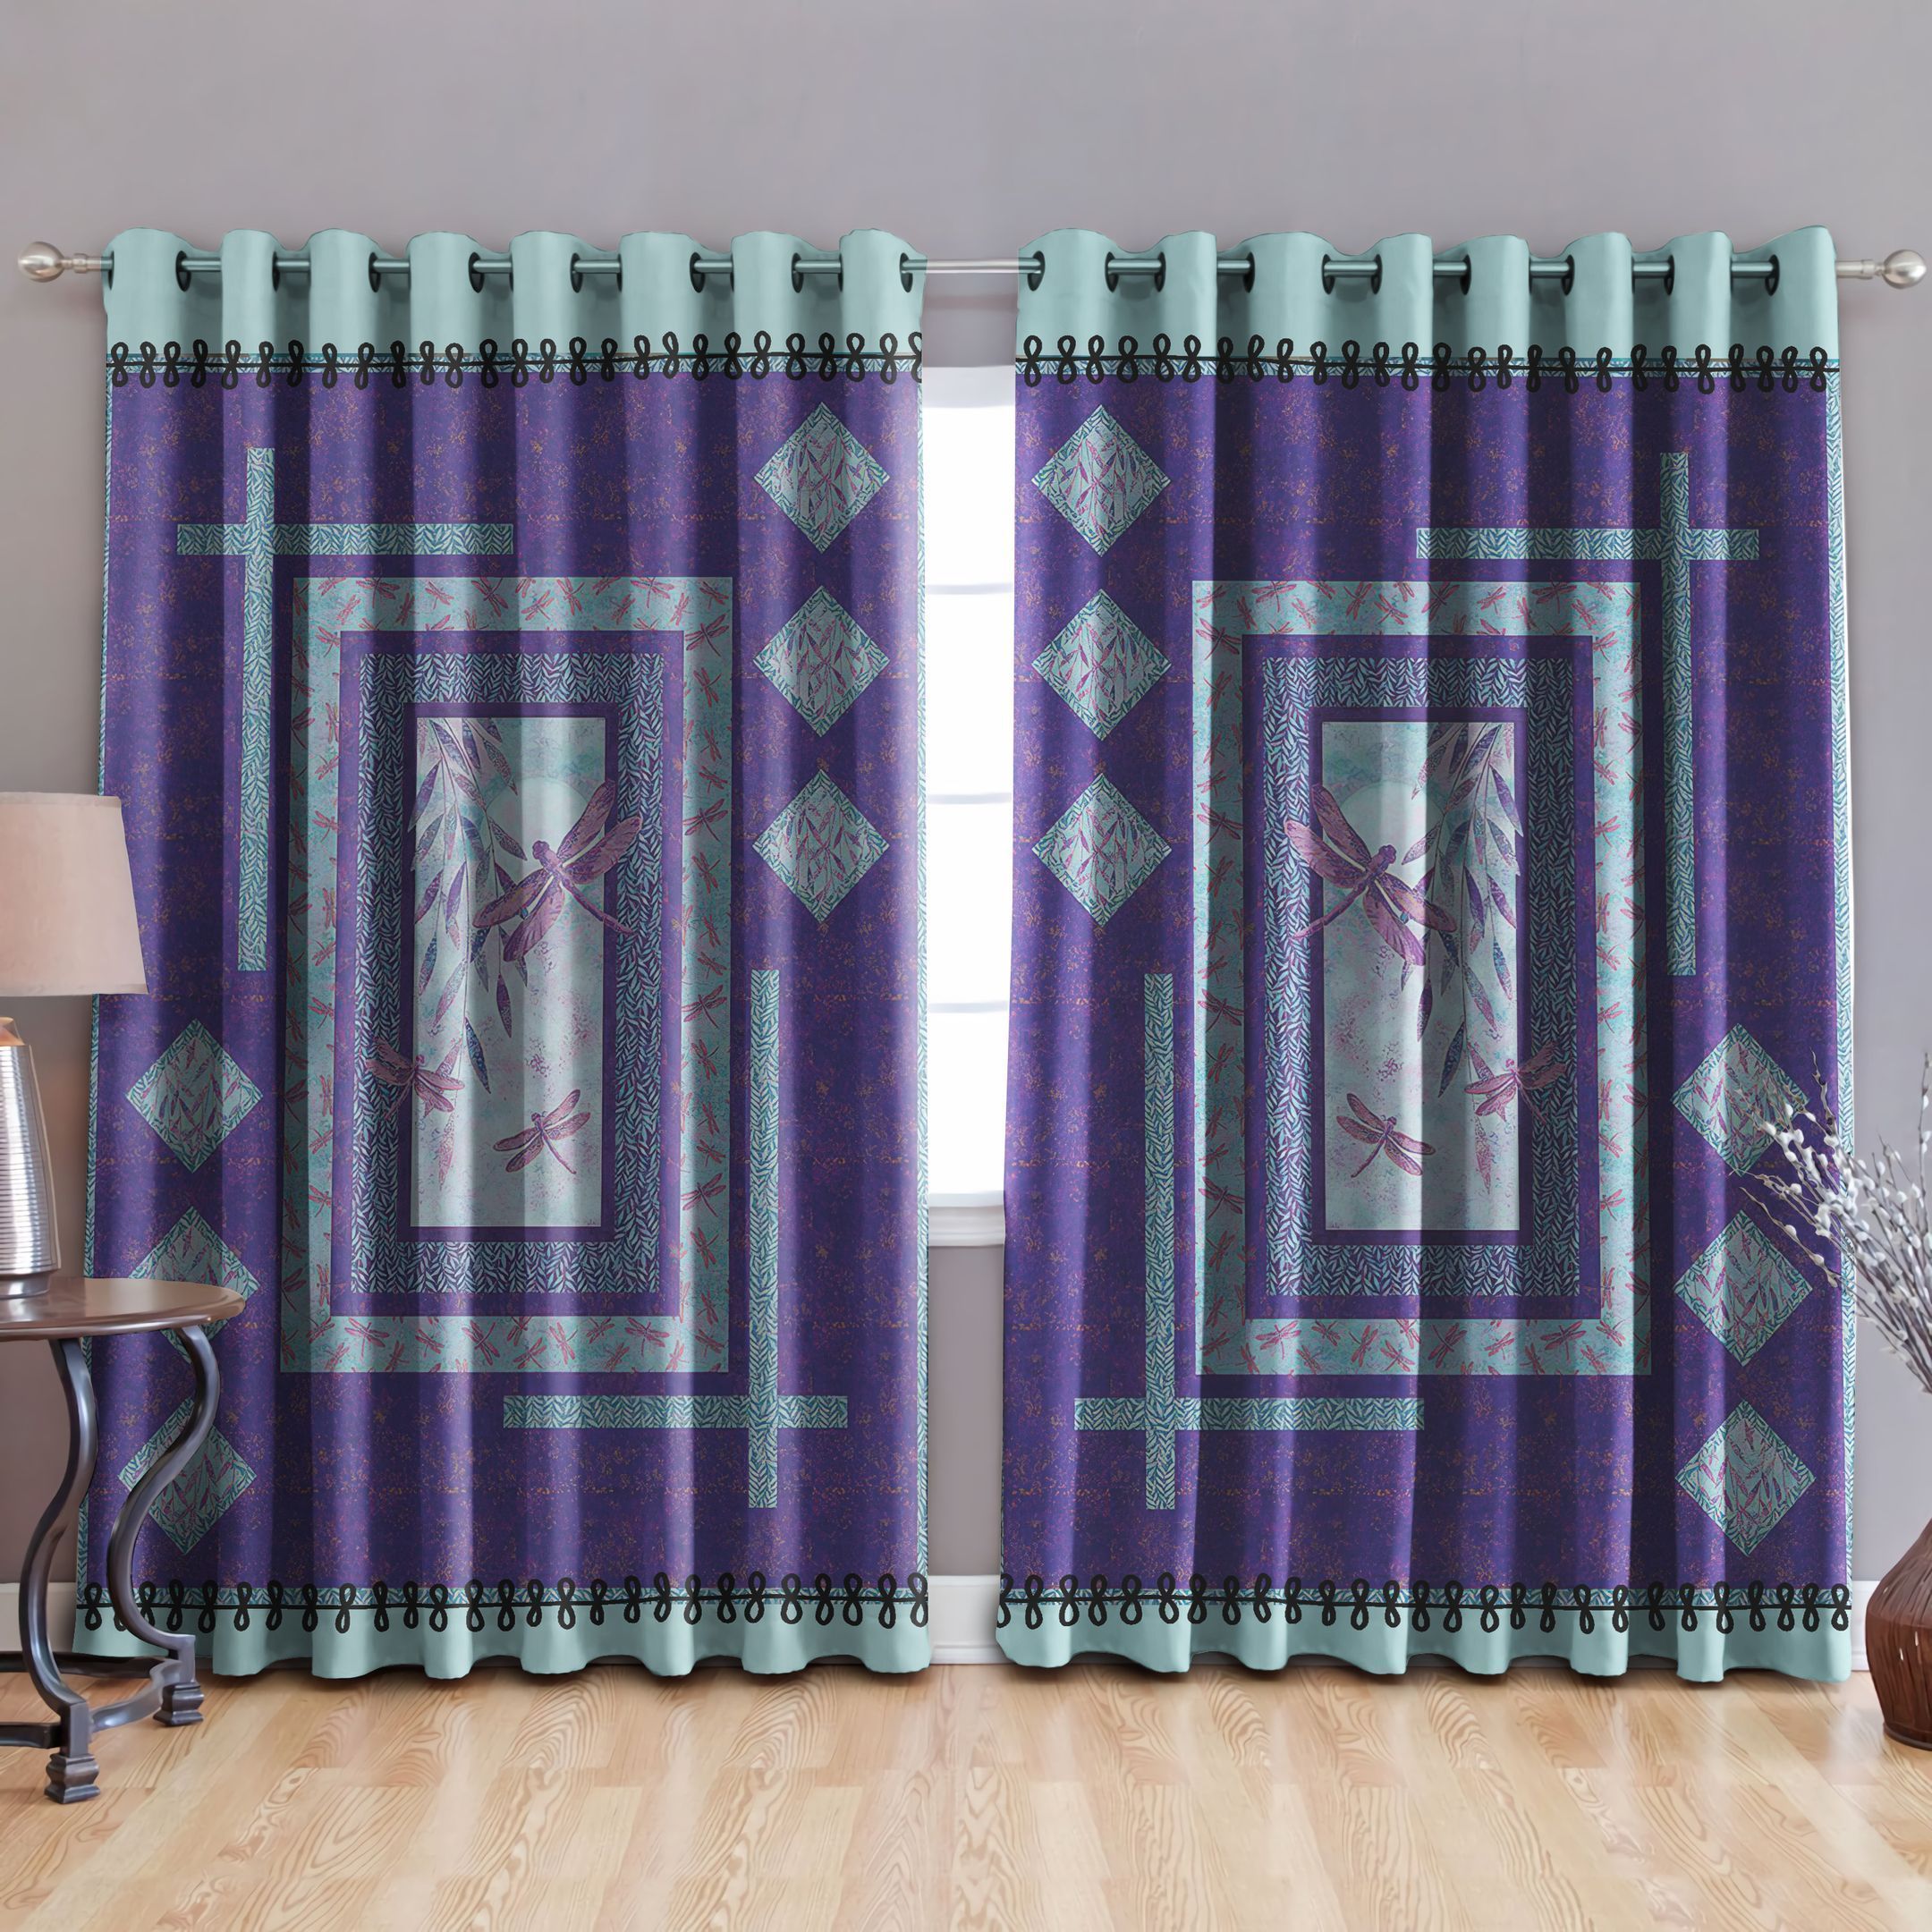 blue and teal background abstract butterfly printed window curtain home decor 6298